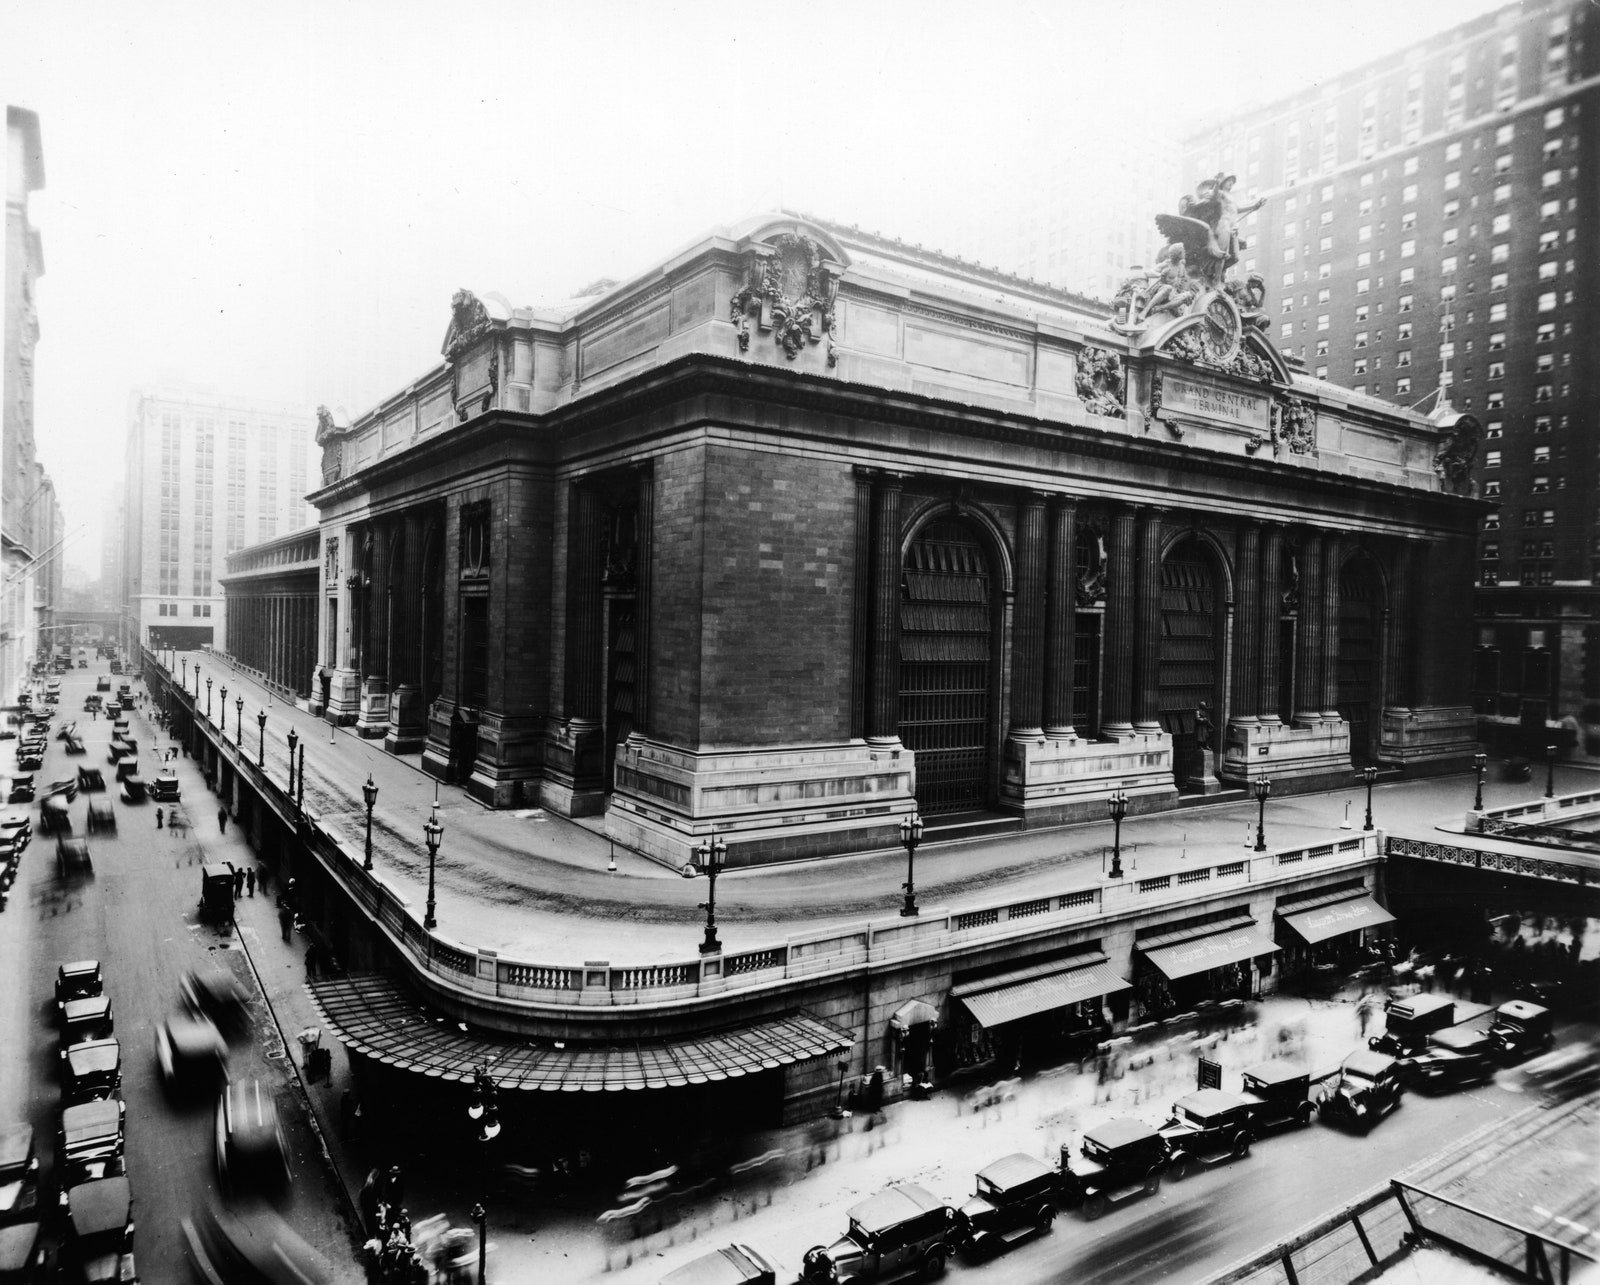 Exterior view of the Grand Central Terminal designed by Reed  Stern Warren  Wetmore circa 1920.